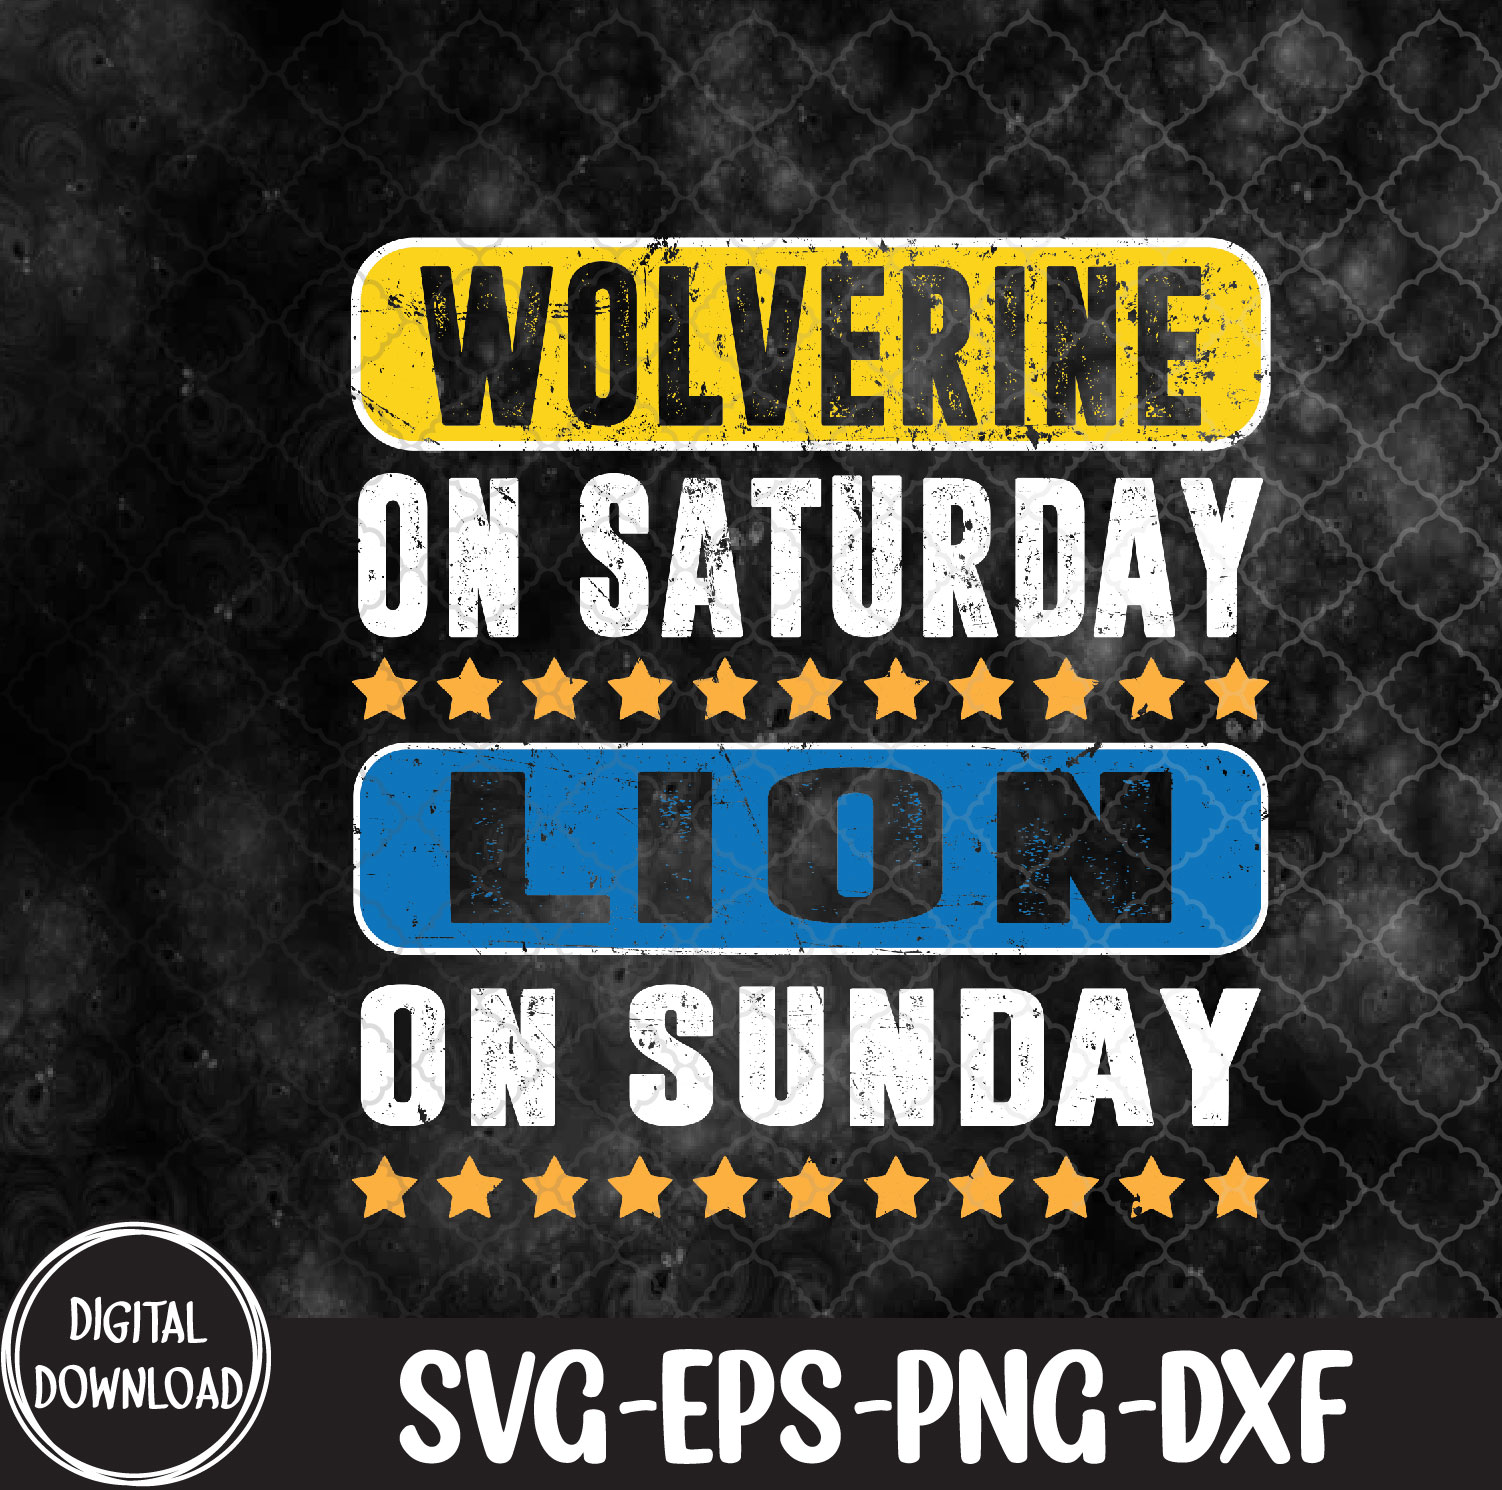 WTMNEW9file 09 98 Wolverine On Saturday Lion On Sunday Funny Detroit, Wolverine On Saturday svg, Lion On Sunday svg, Svg, Eps, Png, Dxf